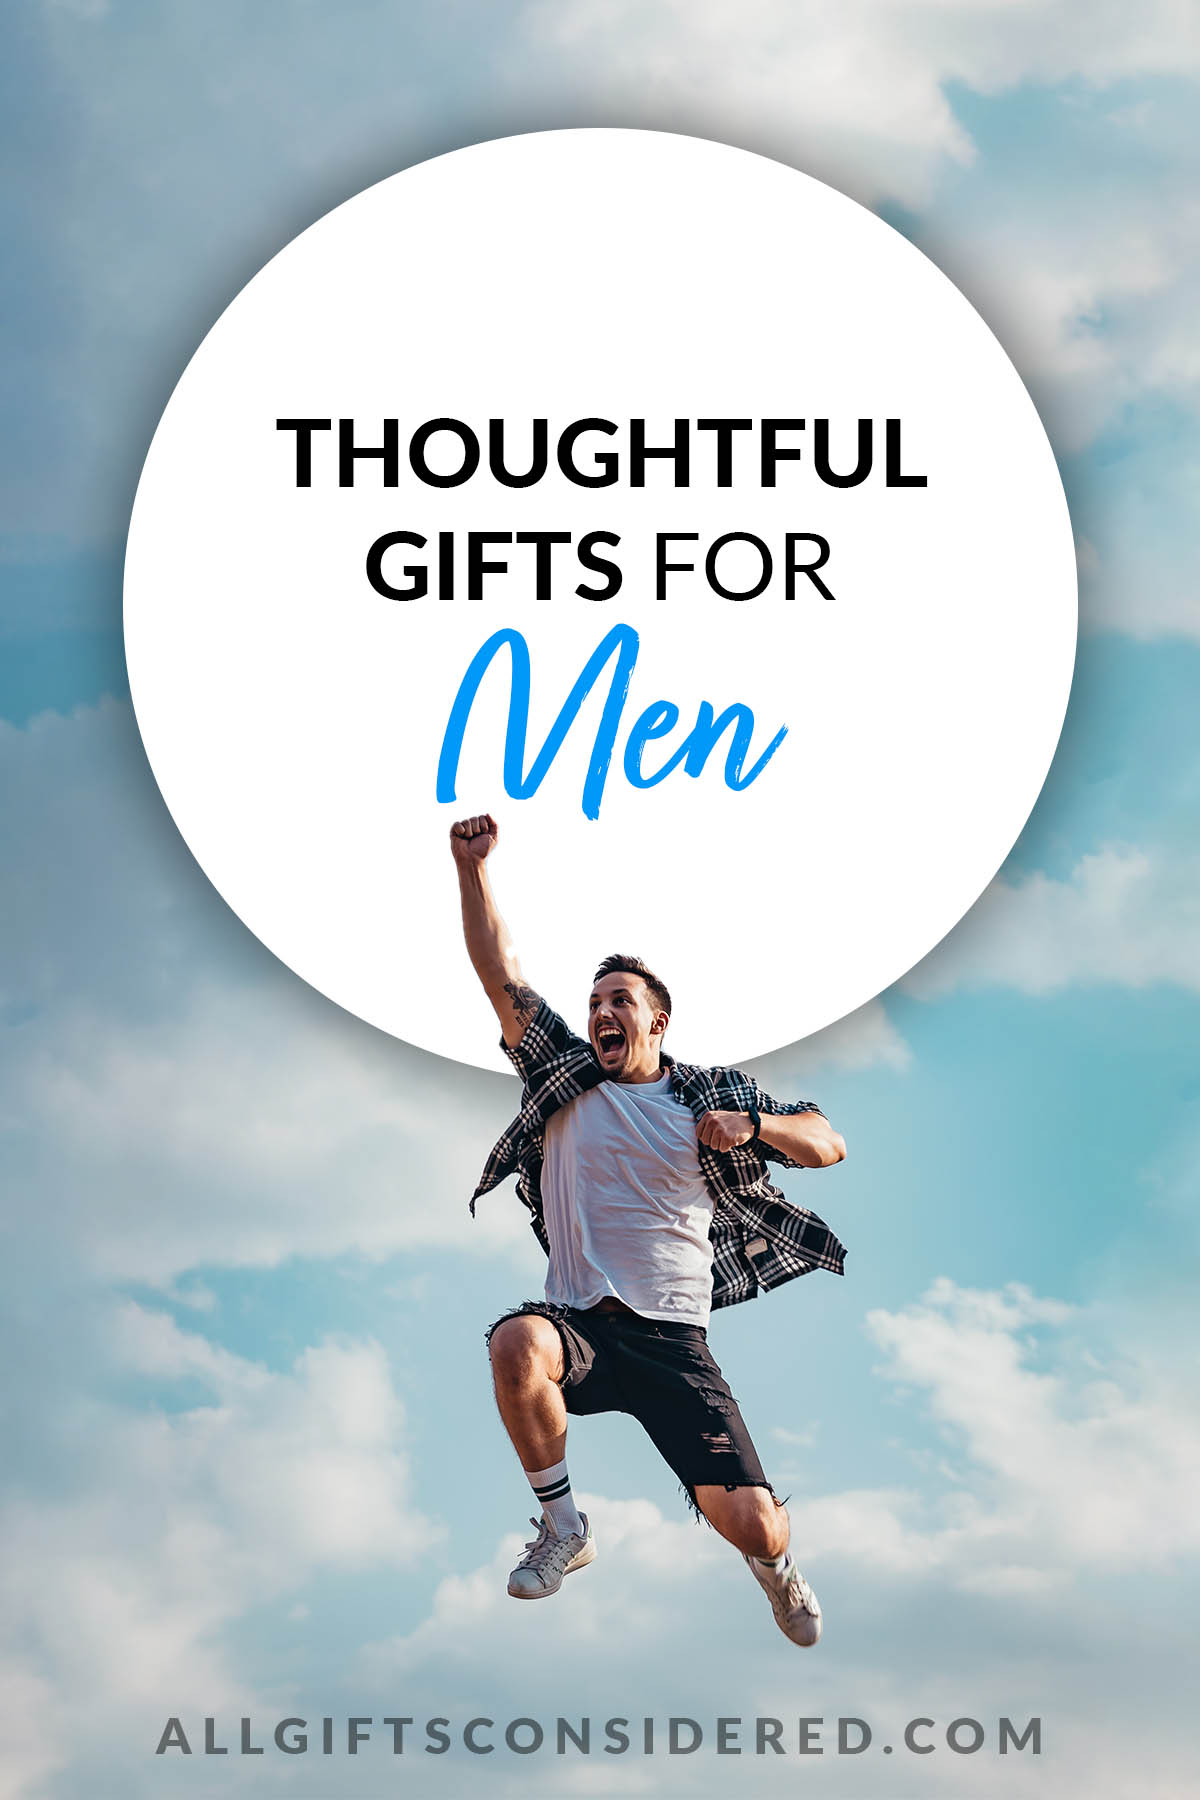 Thoughtful gifts for men - feature image